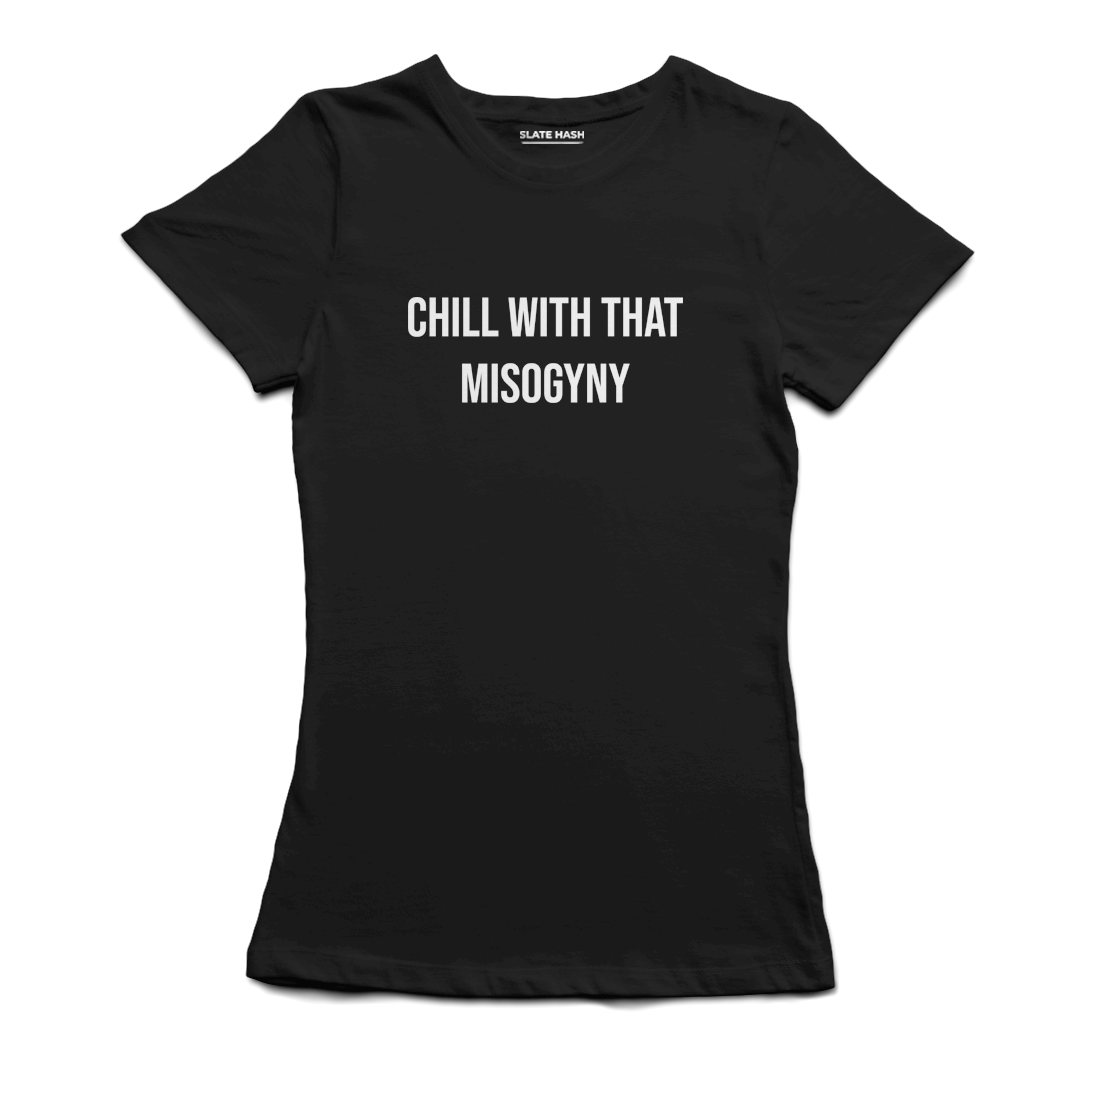 Chill with that misogyny T-Shirt